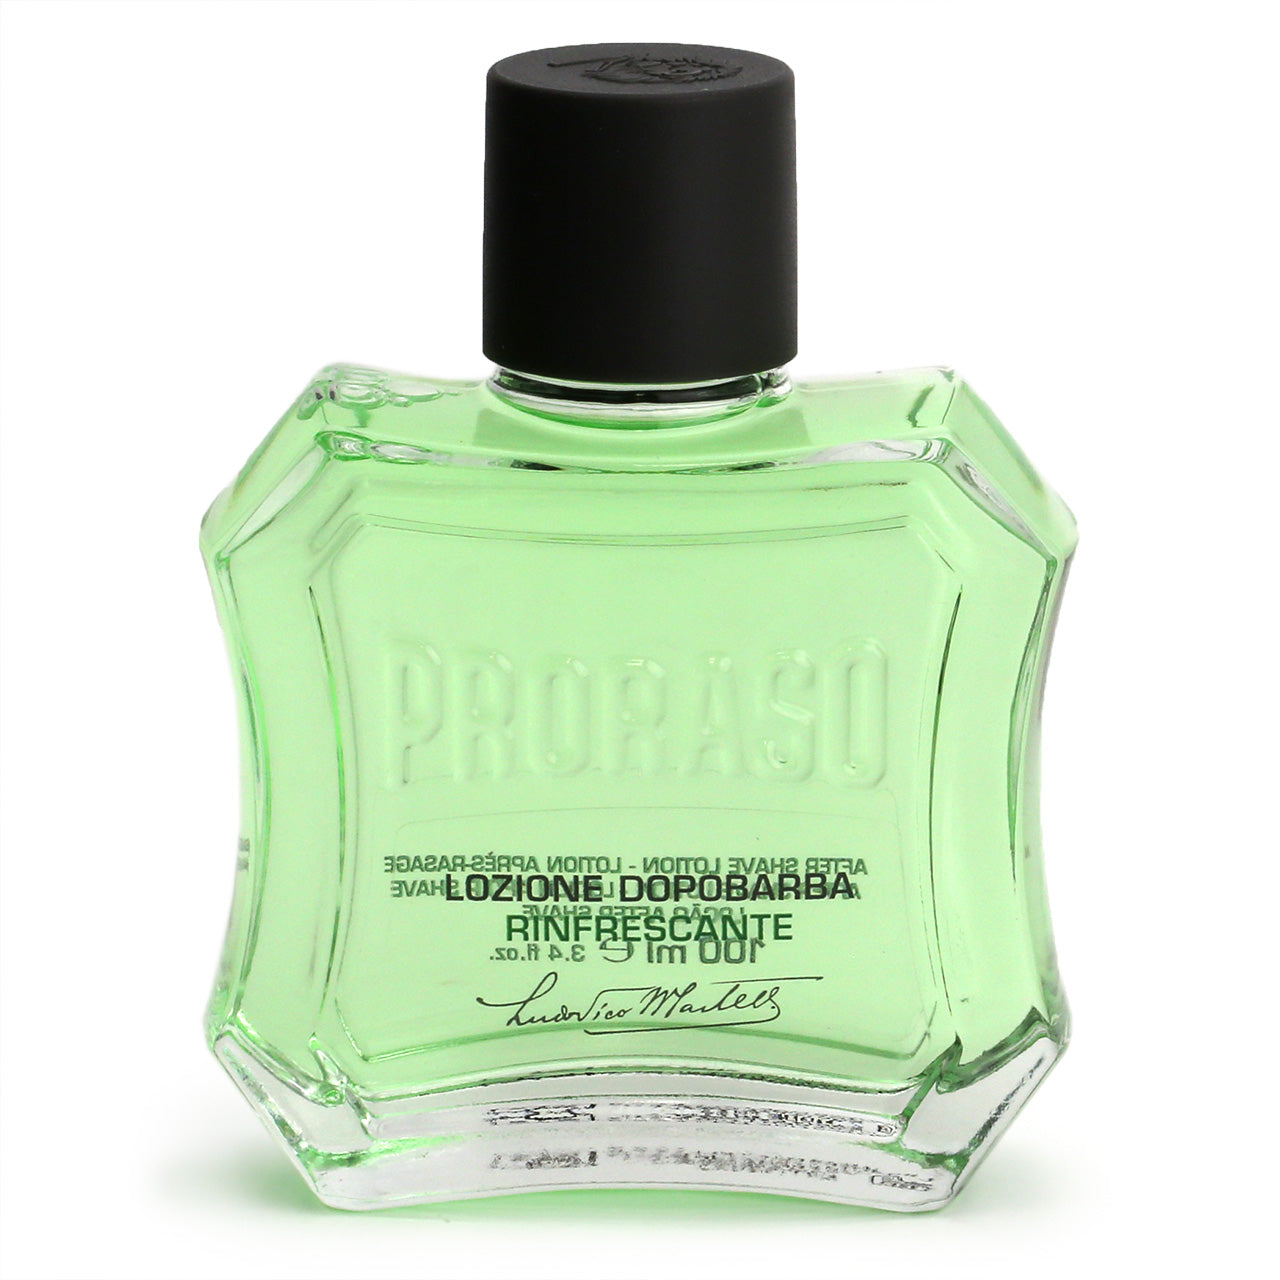 Proraso After Shave Lotion with Eucalyptus & Menthol - Refreshing - with retro bottle shape and box